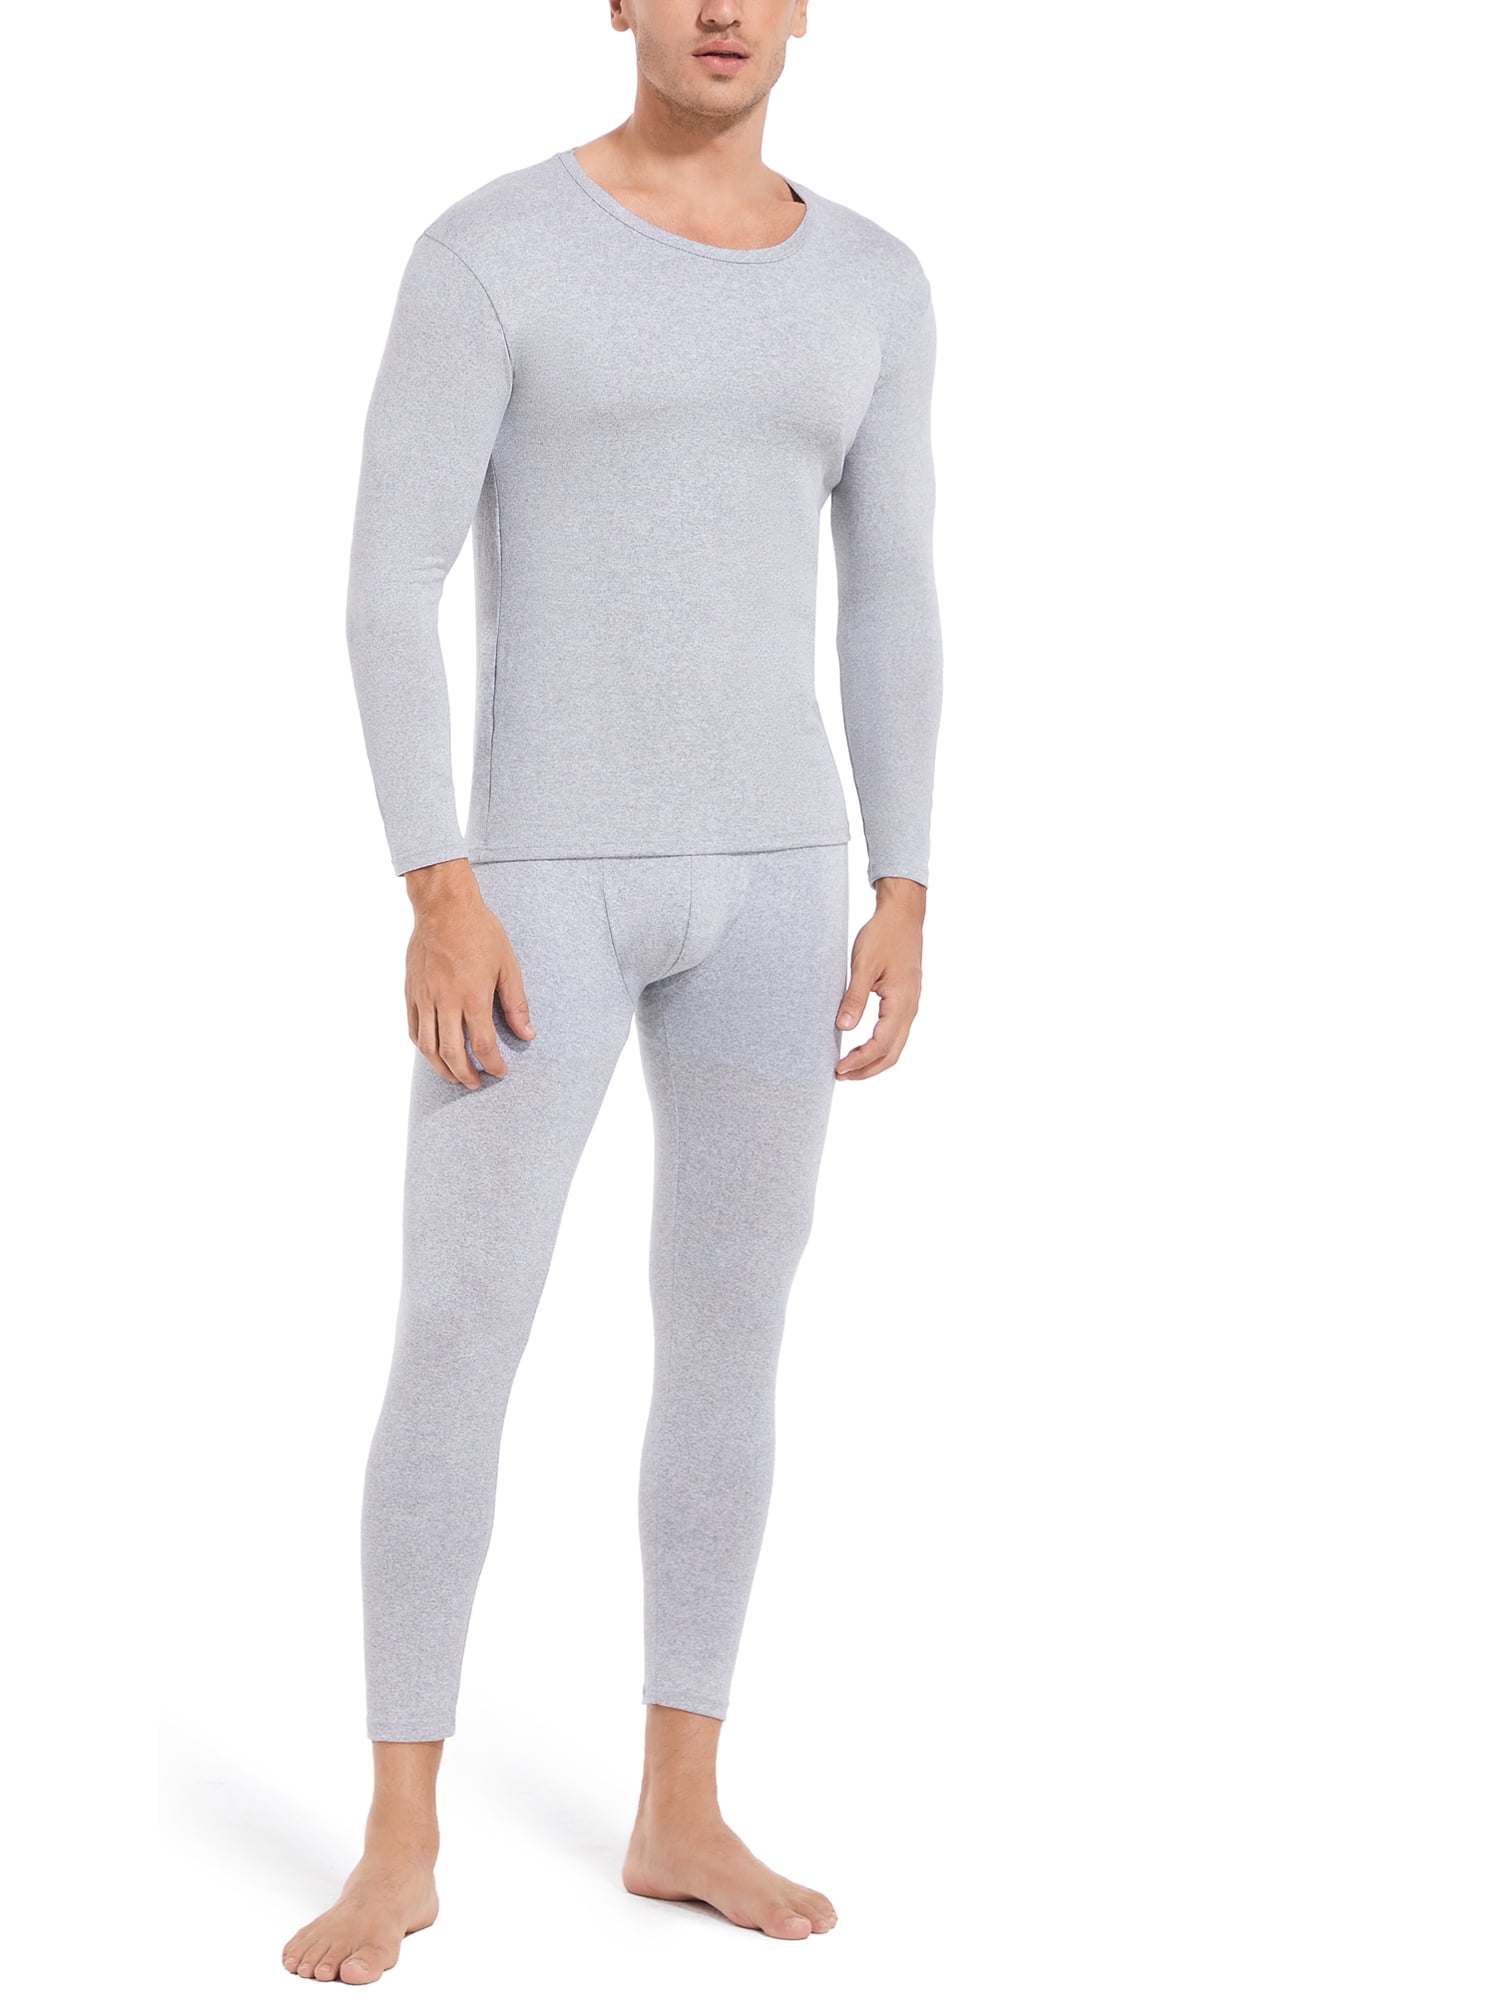 COMFREE Thermal Underwear for Men, Ultra Soft Long Johns Set Fleece Lined Warm  Base Layer Top and Bottom for Cold Weather 